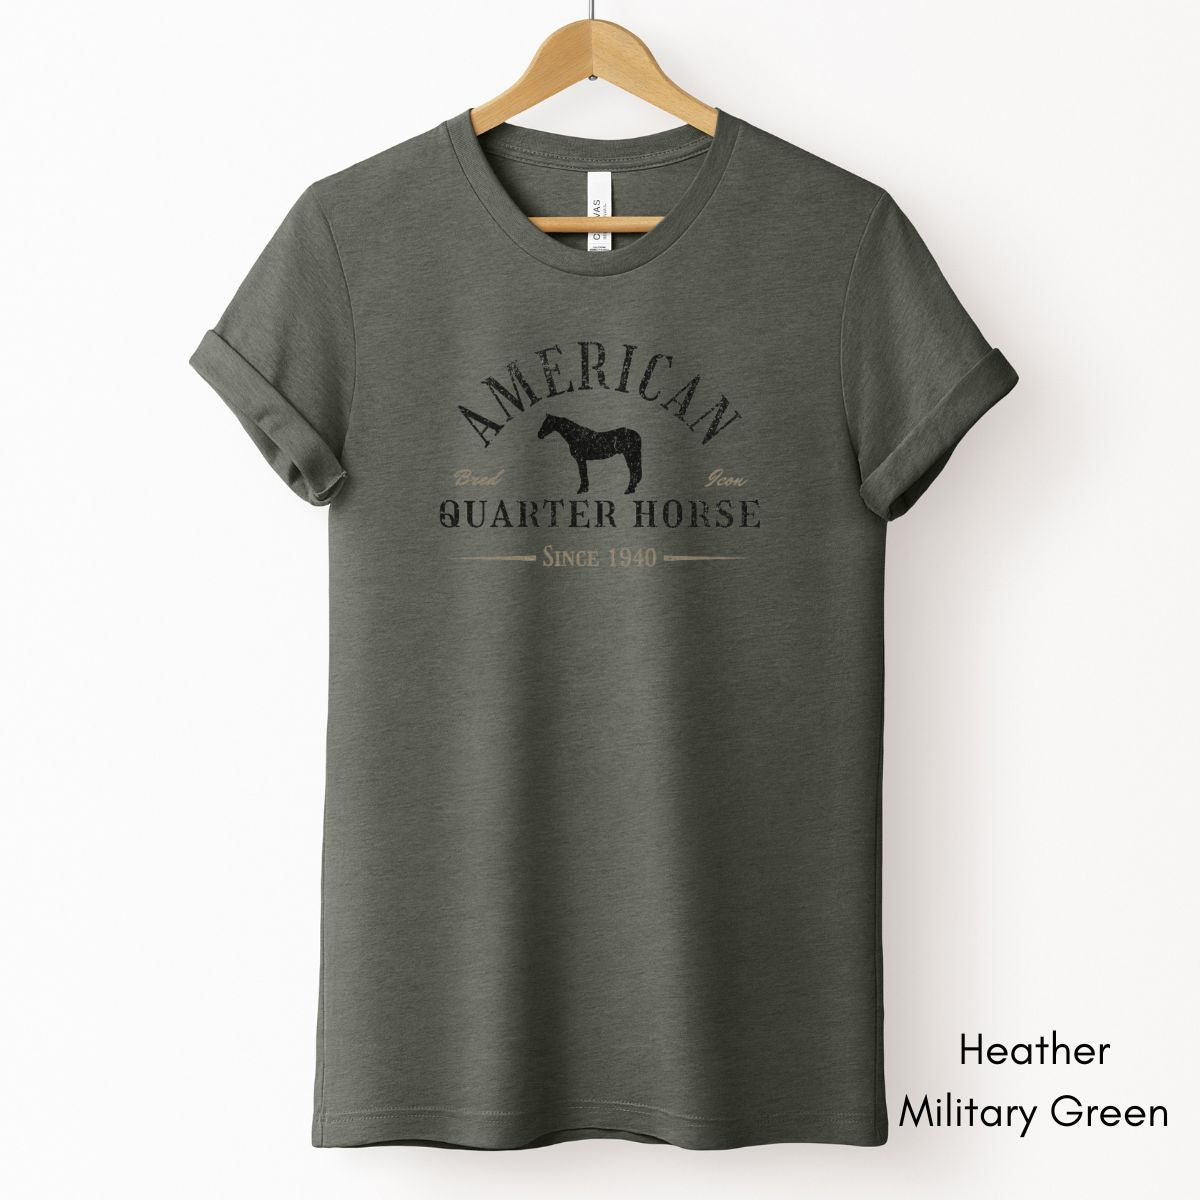 American Quarter Horse Tee | Horse Lover Short Sleeve Tee | Equestrian T-shirt | Gift for Quarter Horse Lover | Pastel Spring Color Tee